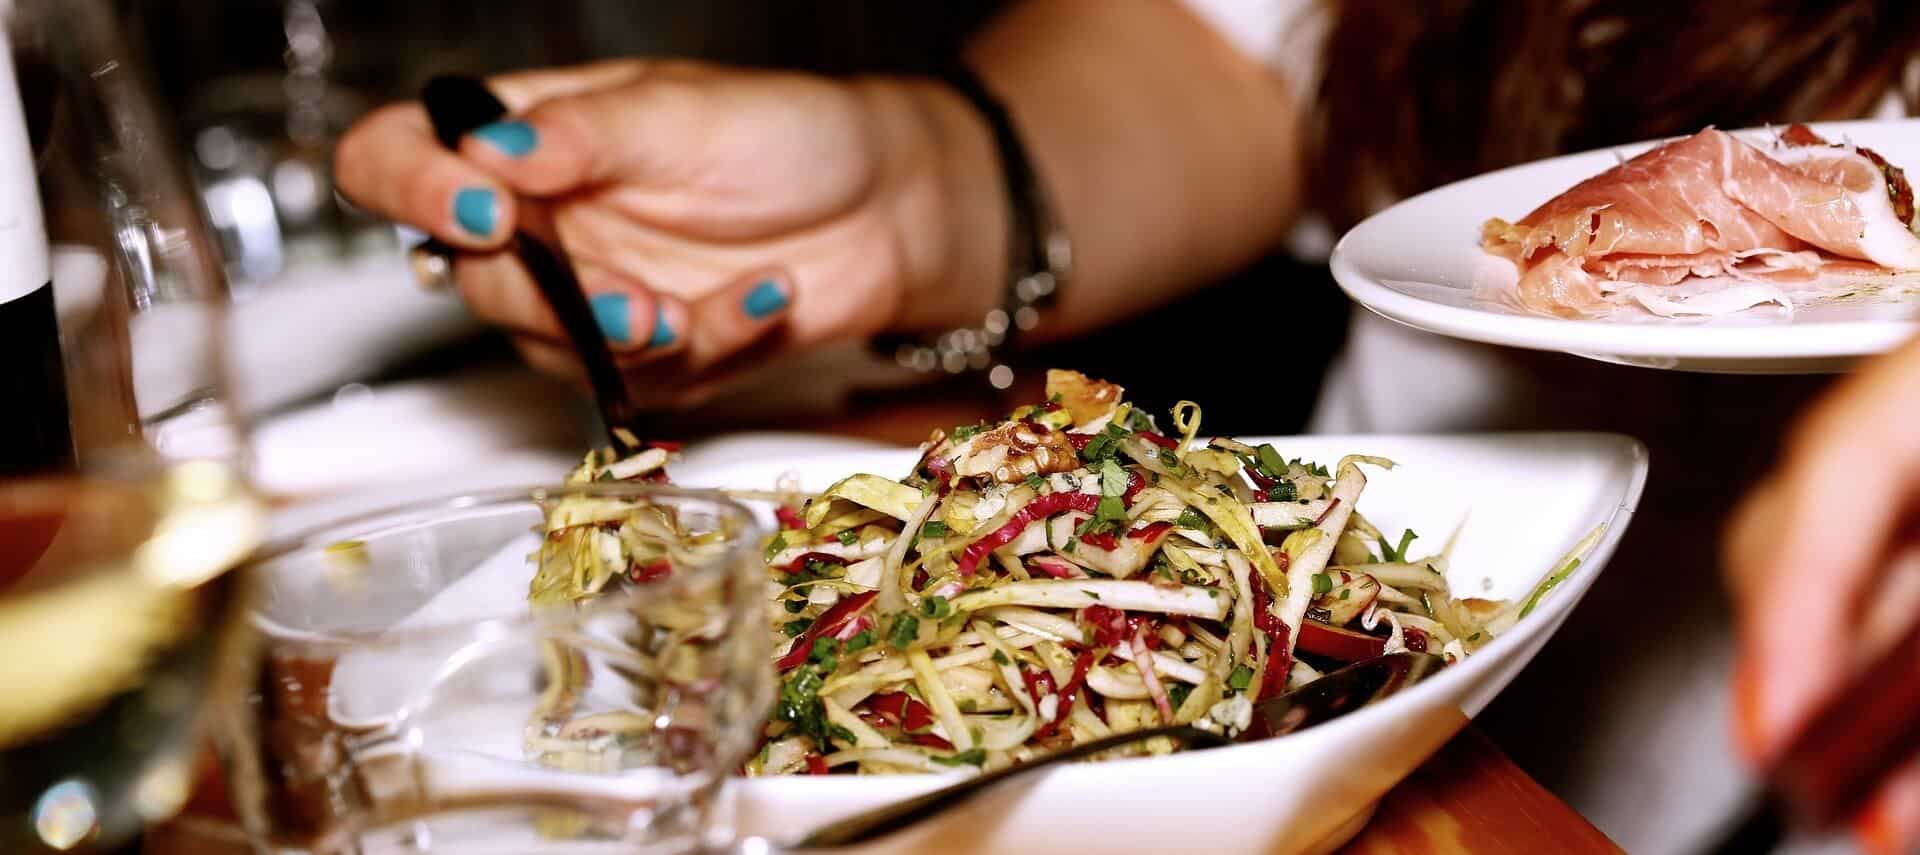 A person with turquoise fingernails is serving a salad with a fork.